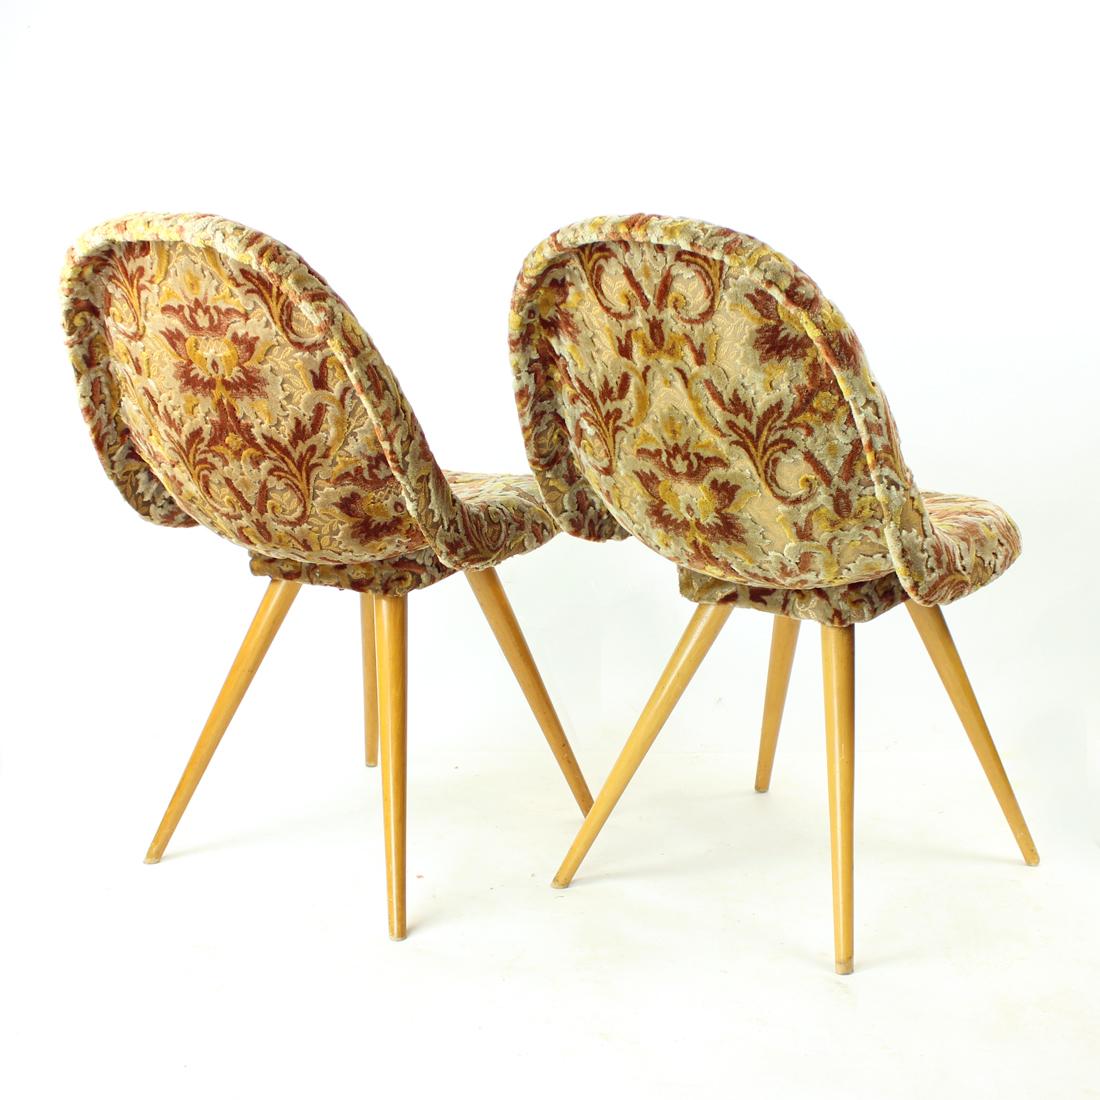 Mid-20th Century Pair Of Midcentury Shell Chairs By Miroslav Navratil, Czechoslovakia 1960s For Sale